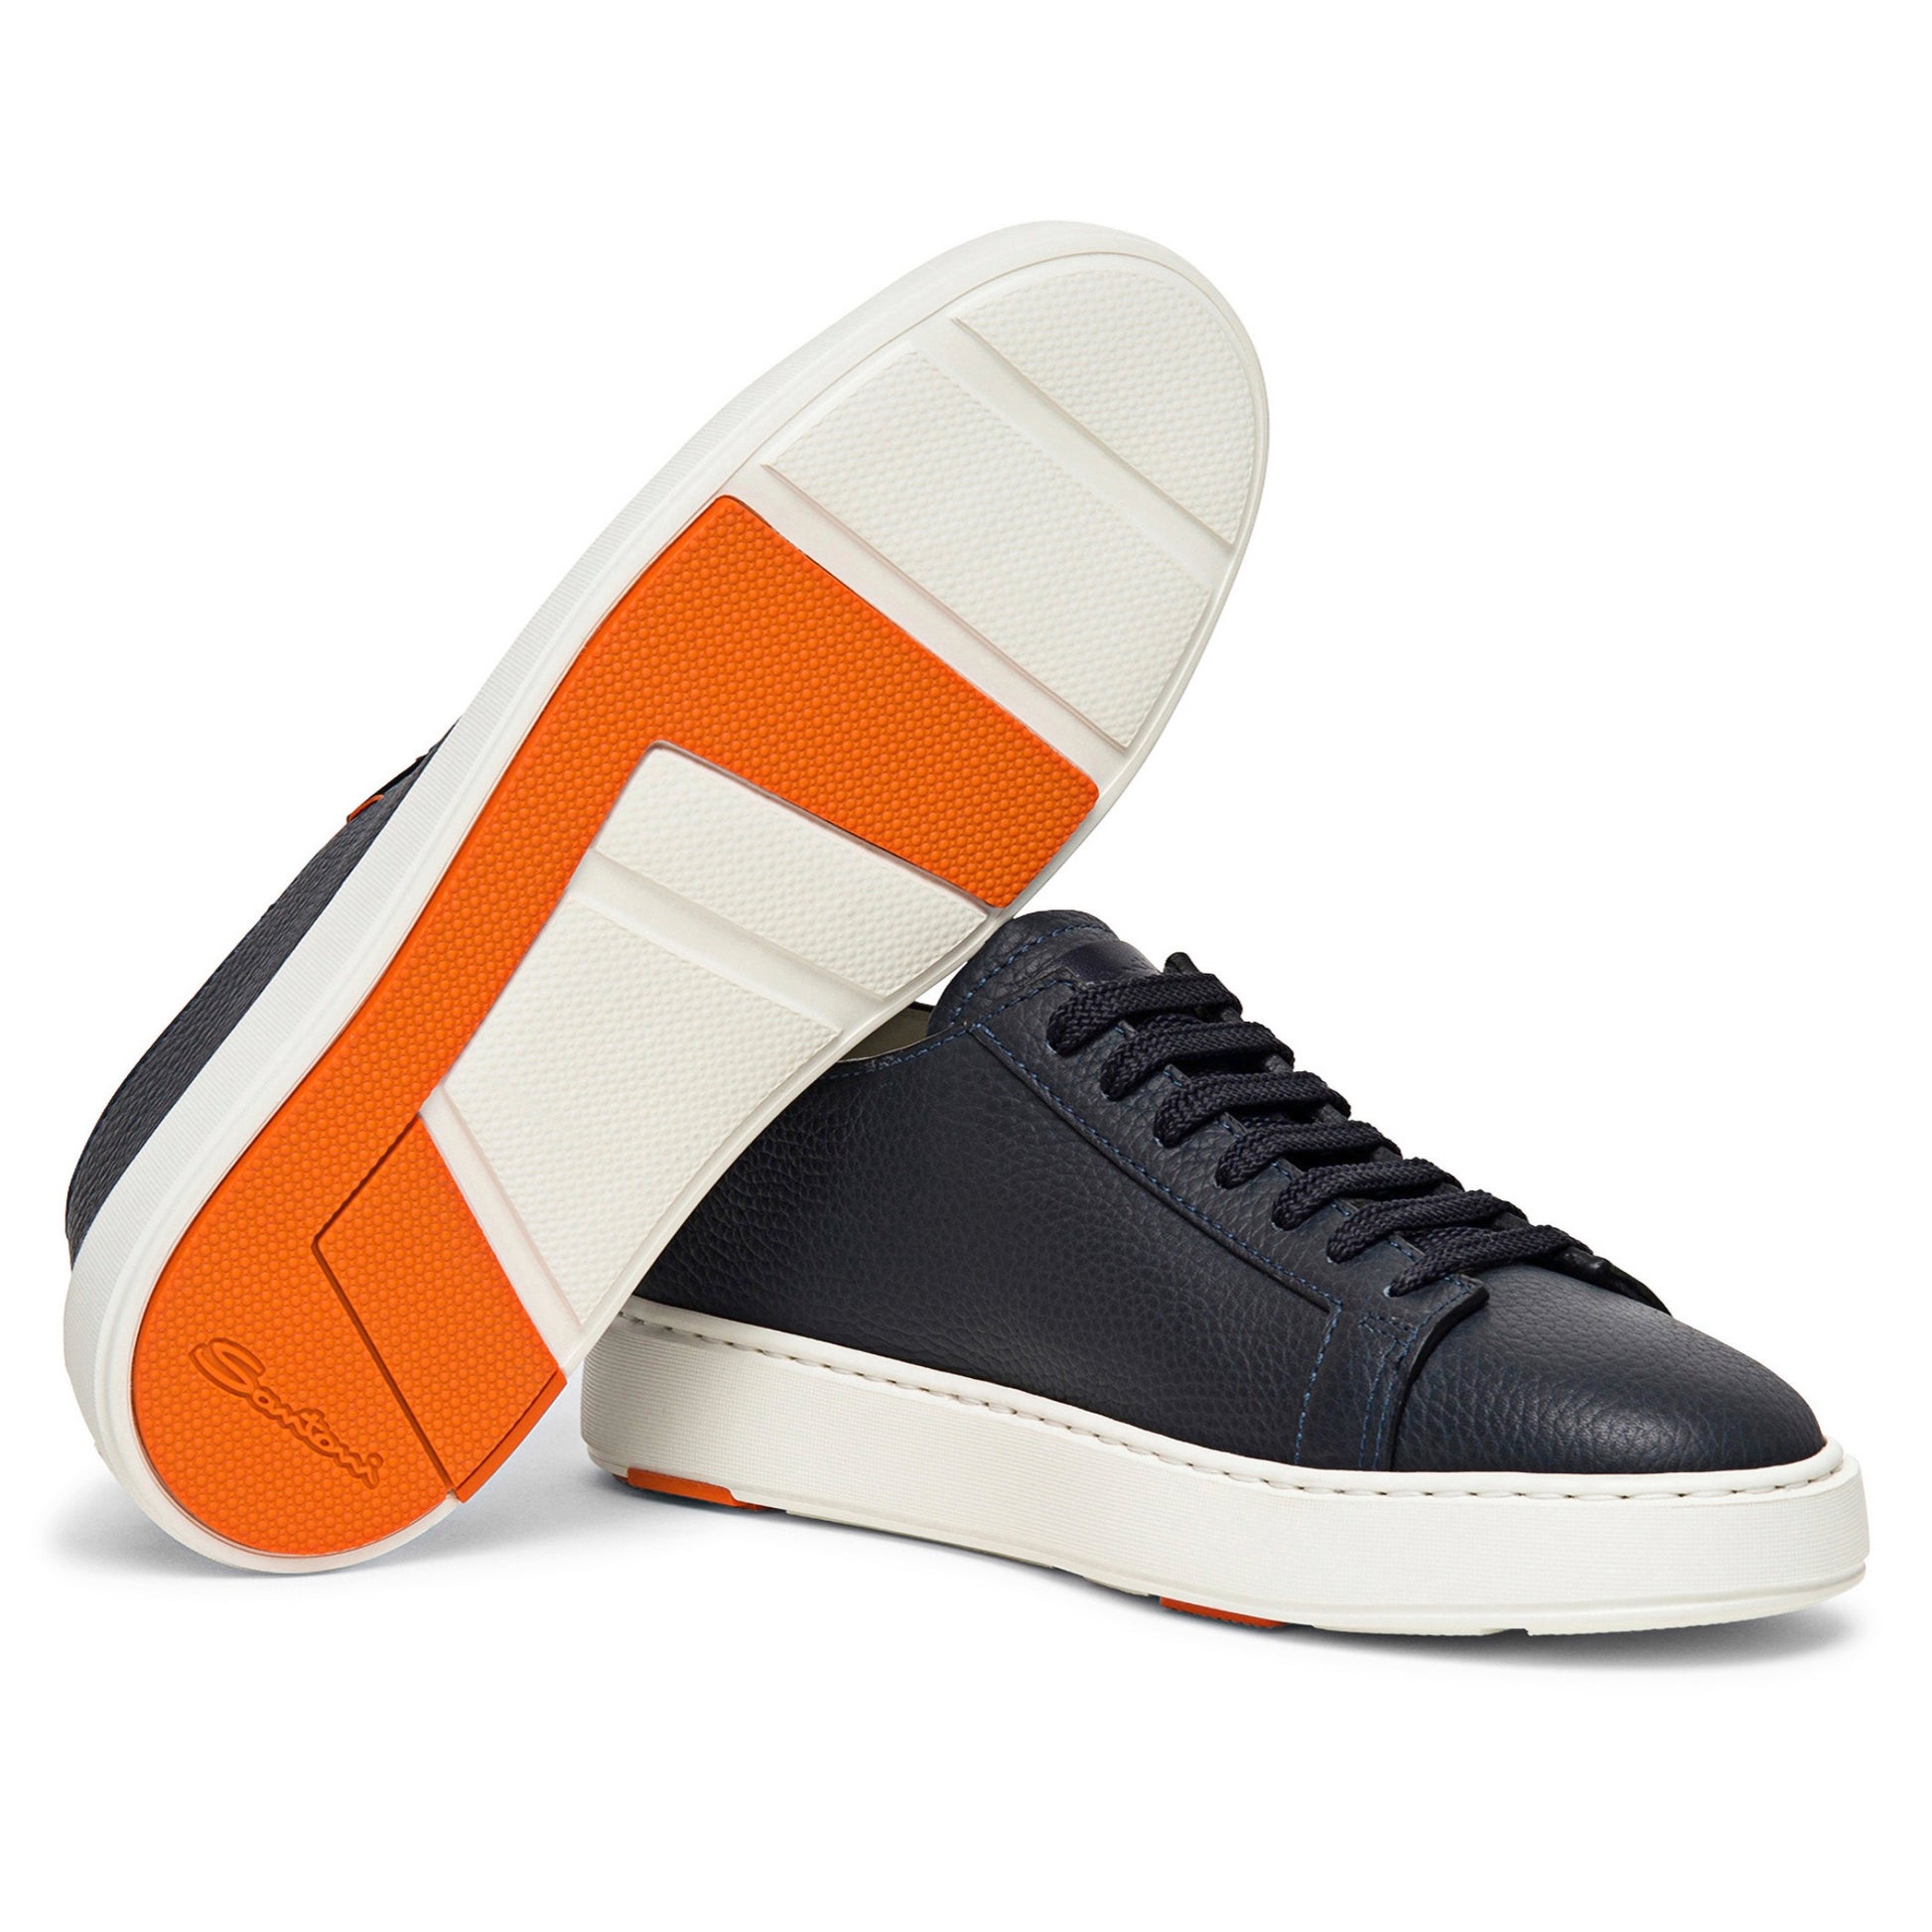 Style meets functionality, whilst sporty influences meet luxurious attitude. This Santoni men’s sneaker is crafted from luxurious tumbled leather, embellished with a small coloured stitch in celebration of our signature orange tone. Its wide-fit silhouette with round toe and flexible cupsole ensure maximum comfort from morning to night.